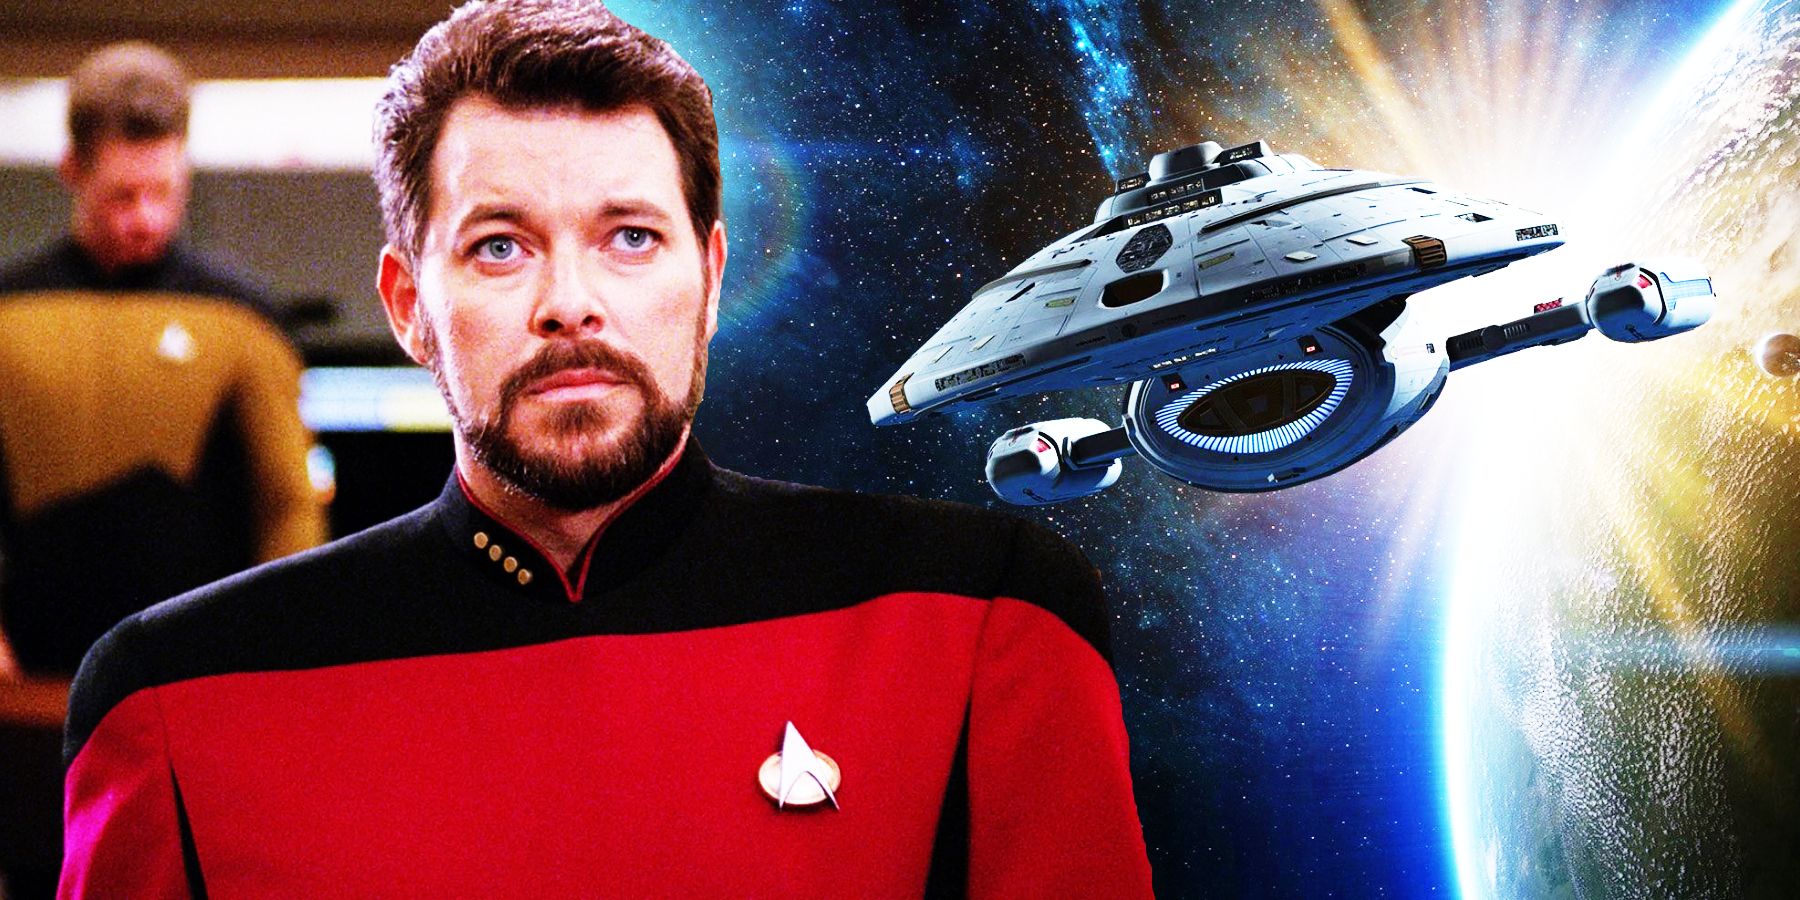 Will Riker was offered command of the USS Voyager in Star Trek